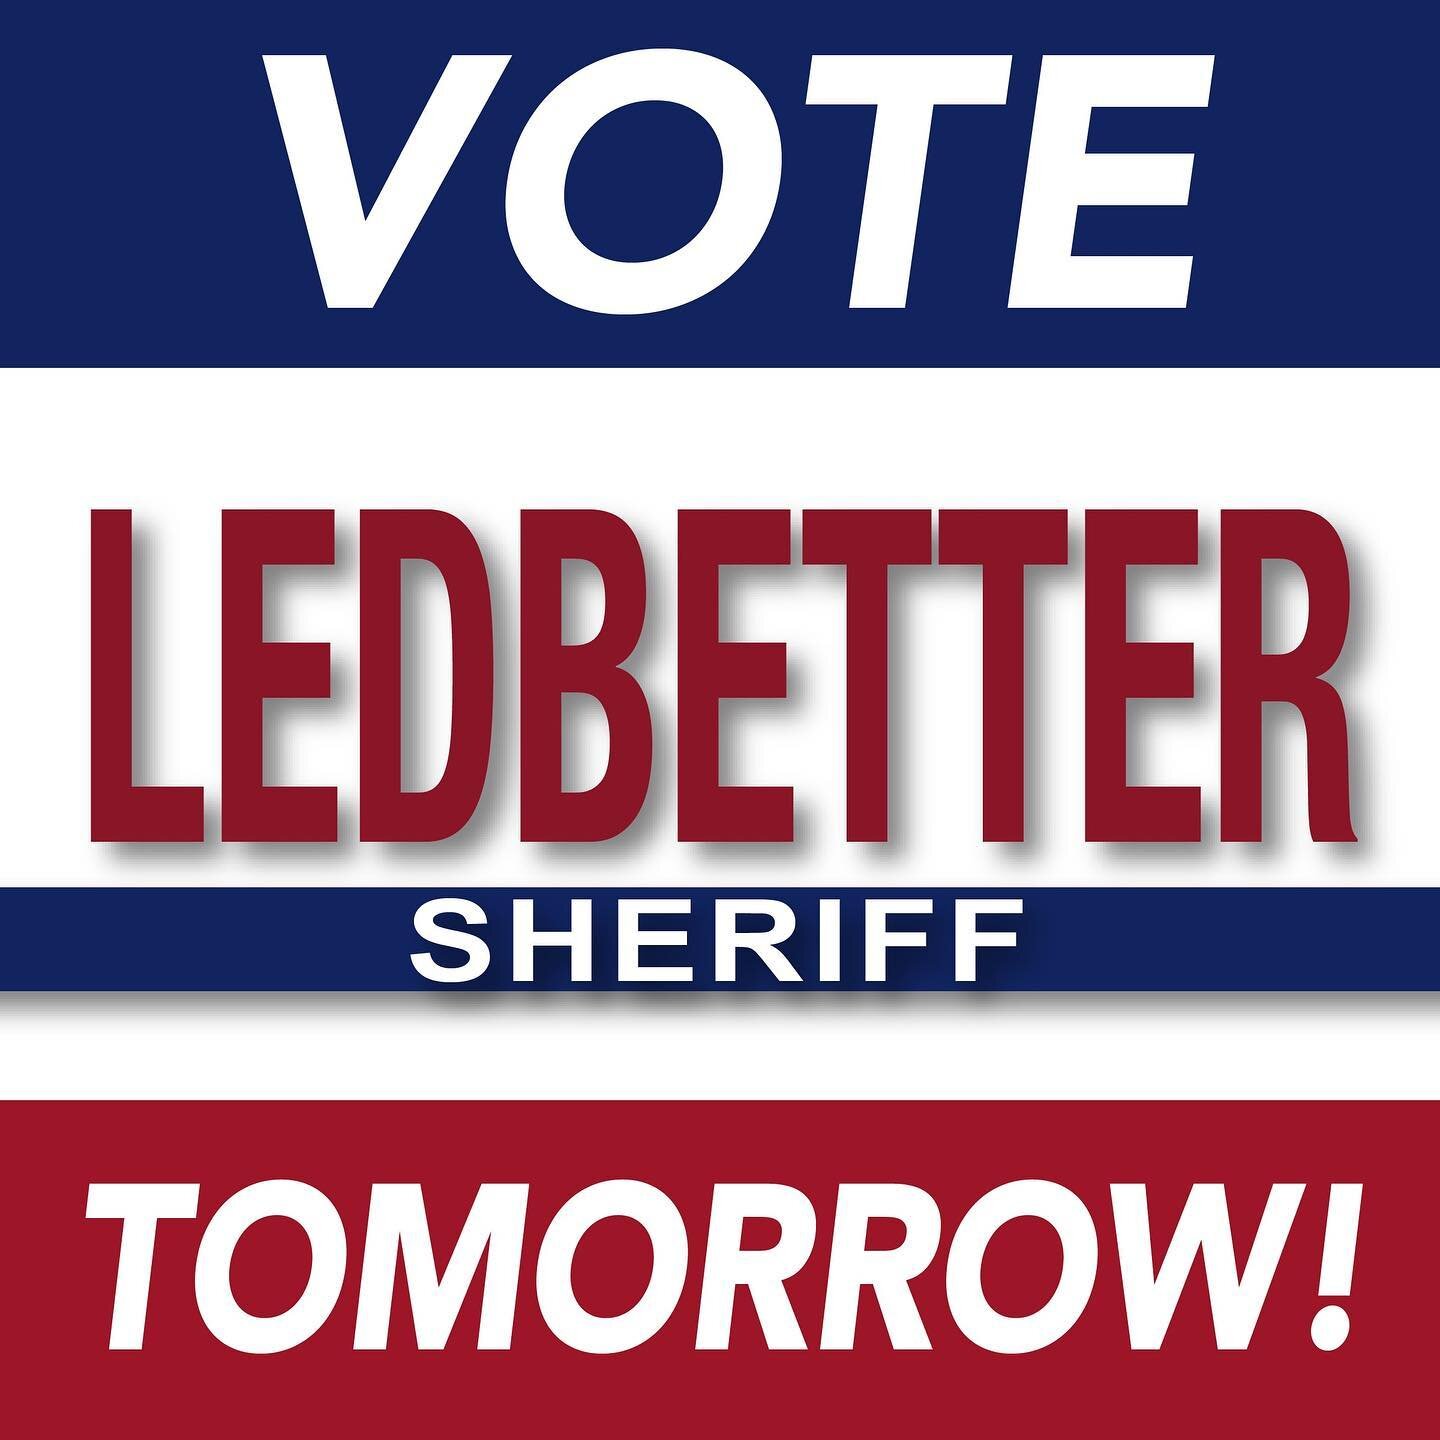 TOMORROW is the big day!! Mark your calendars to mark your ballot for LEDBETTER! #LetsKeepLedbetter